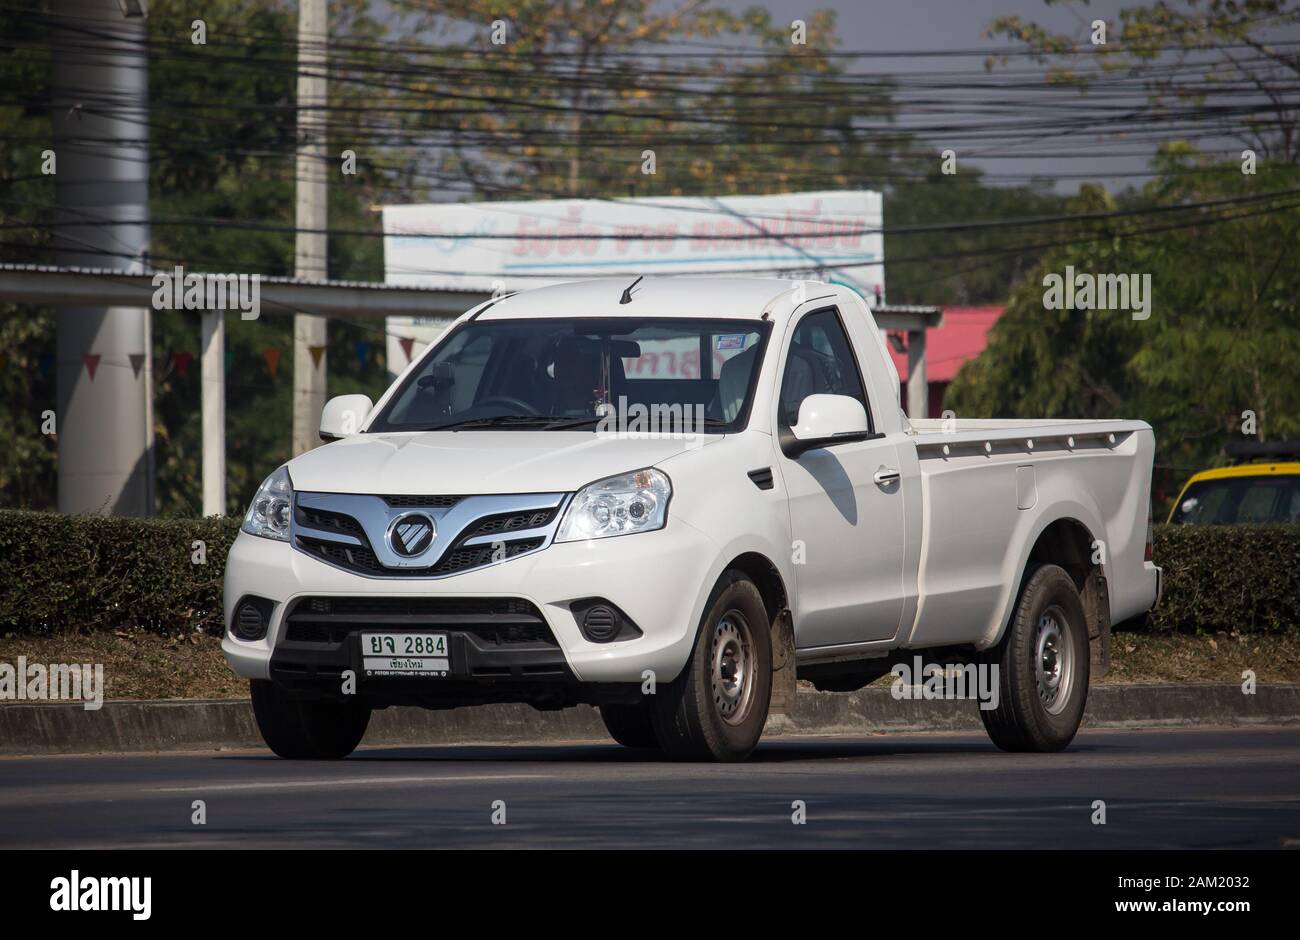 Foton Motor High Resolution Stock Photography And Images Alamy